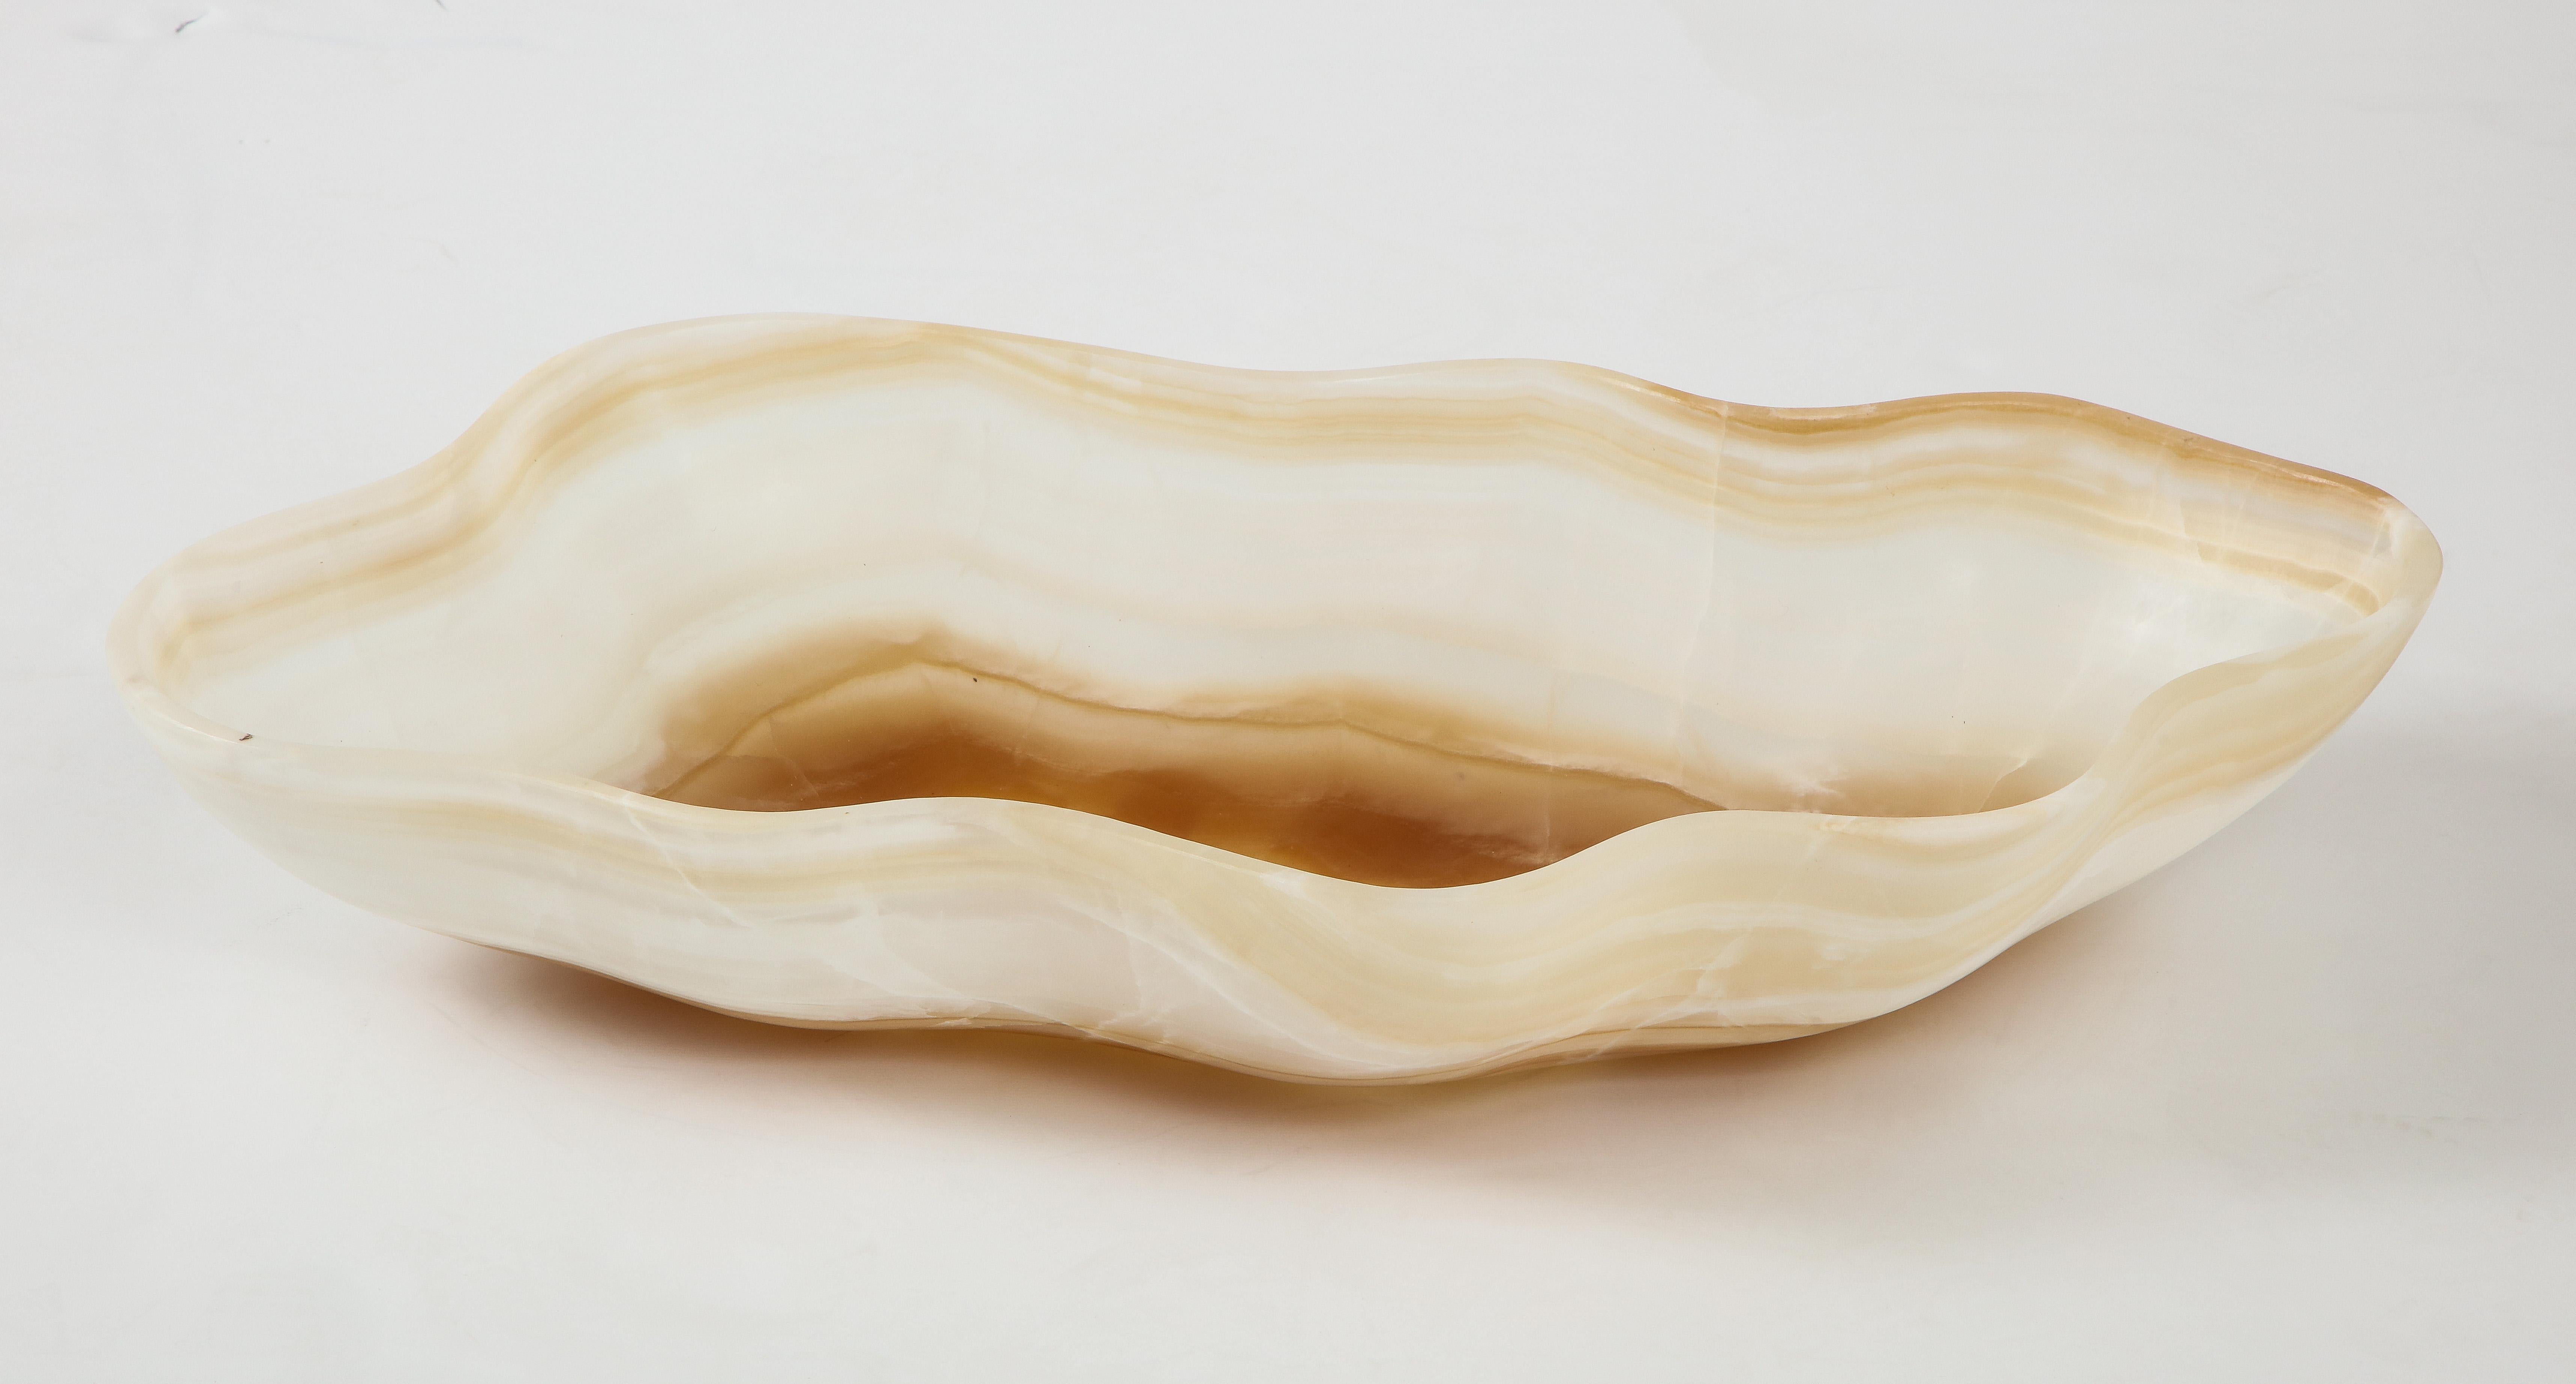 A large white, gold and rust hand carved onyx bowl or centerpiece in an impressive size. Alternating translucent and semi opaque undulating bands of clear, pale gold and rust create an exquisite pattern on this utilitarian and stunning centerpiece.